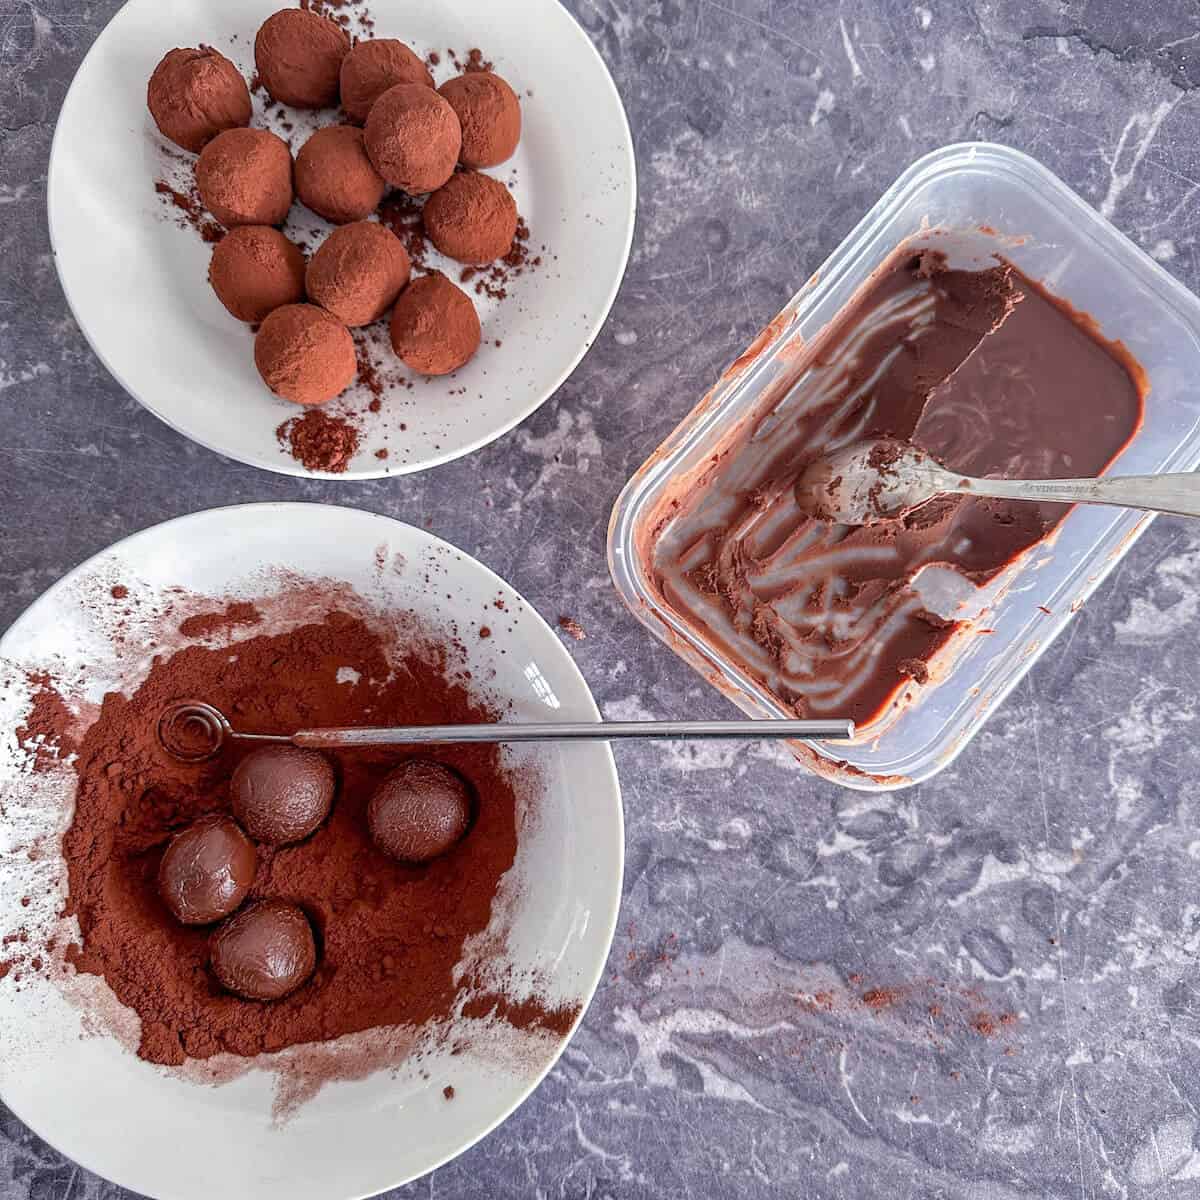 A bowl of cocoa powder with 3 chocolate truffles in it, next to a container of truffle mixture and a plate of coated truffles. 